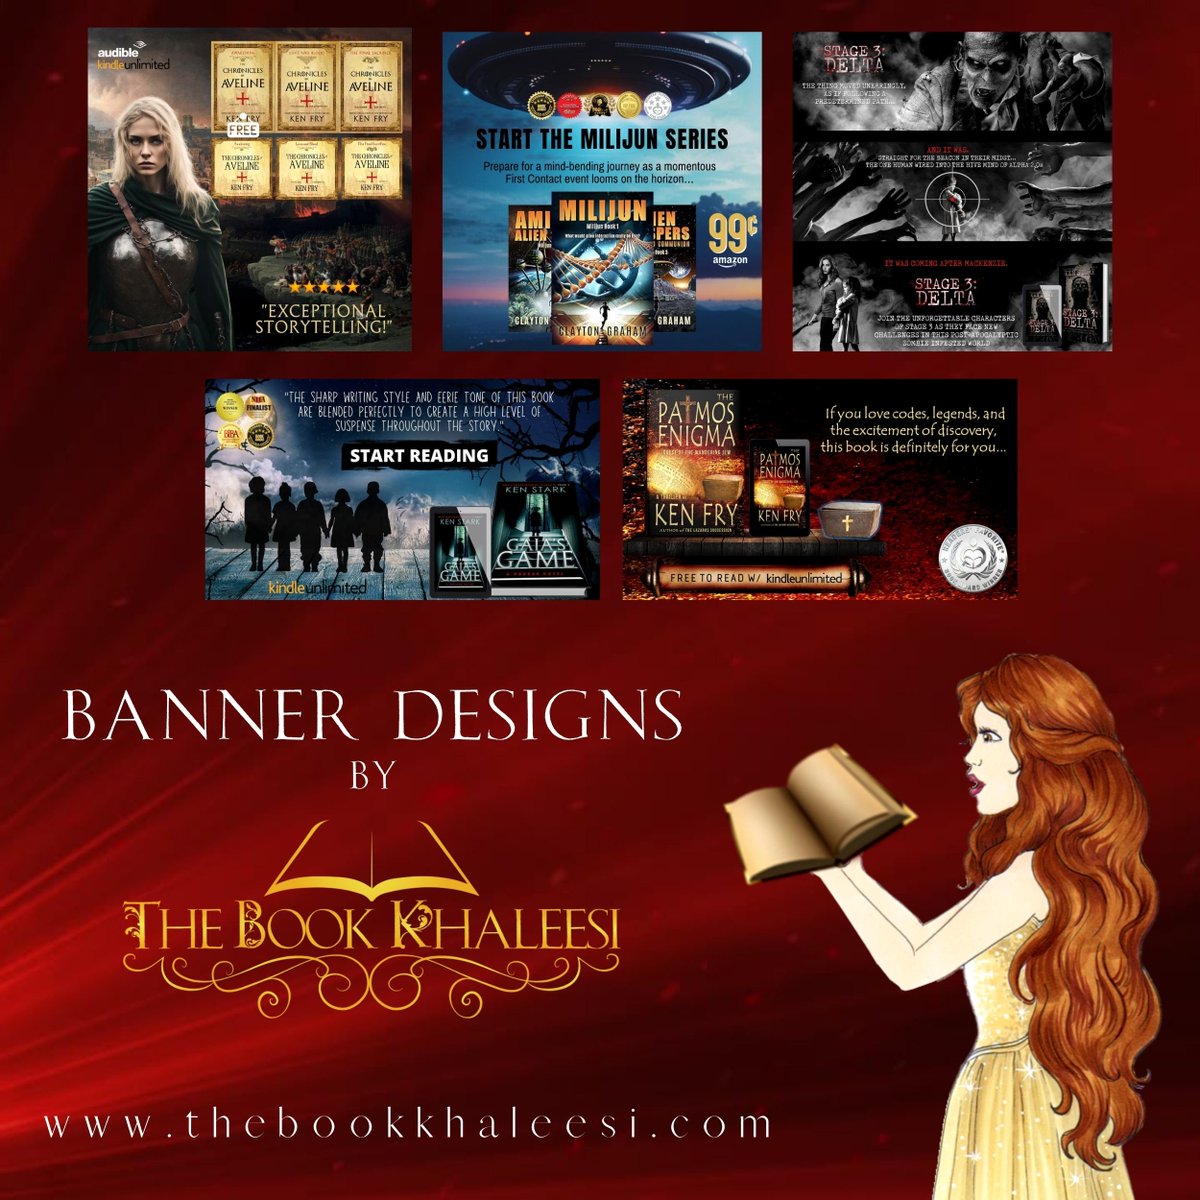 AN IMAGE SPEAKS A THOUSAND WORDS
Your banner and cover are the reader's first encounter with you and your #book.
Make sure it's interesting, high quality.
Presentation matters.
👉 thebookkhaleesi.com/2016/08/still-…

#bannerdesign #thebookkhaleesi #graphicdesign
#advertising #bookmarketing